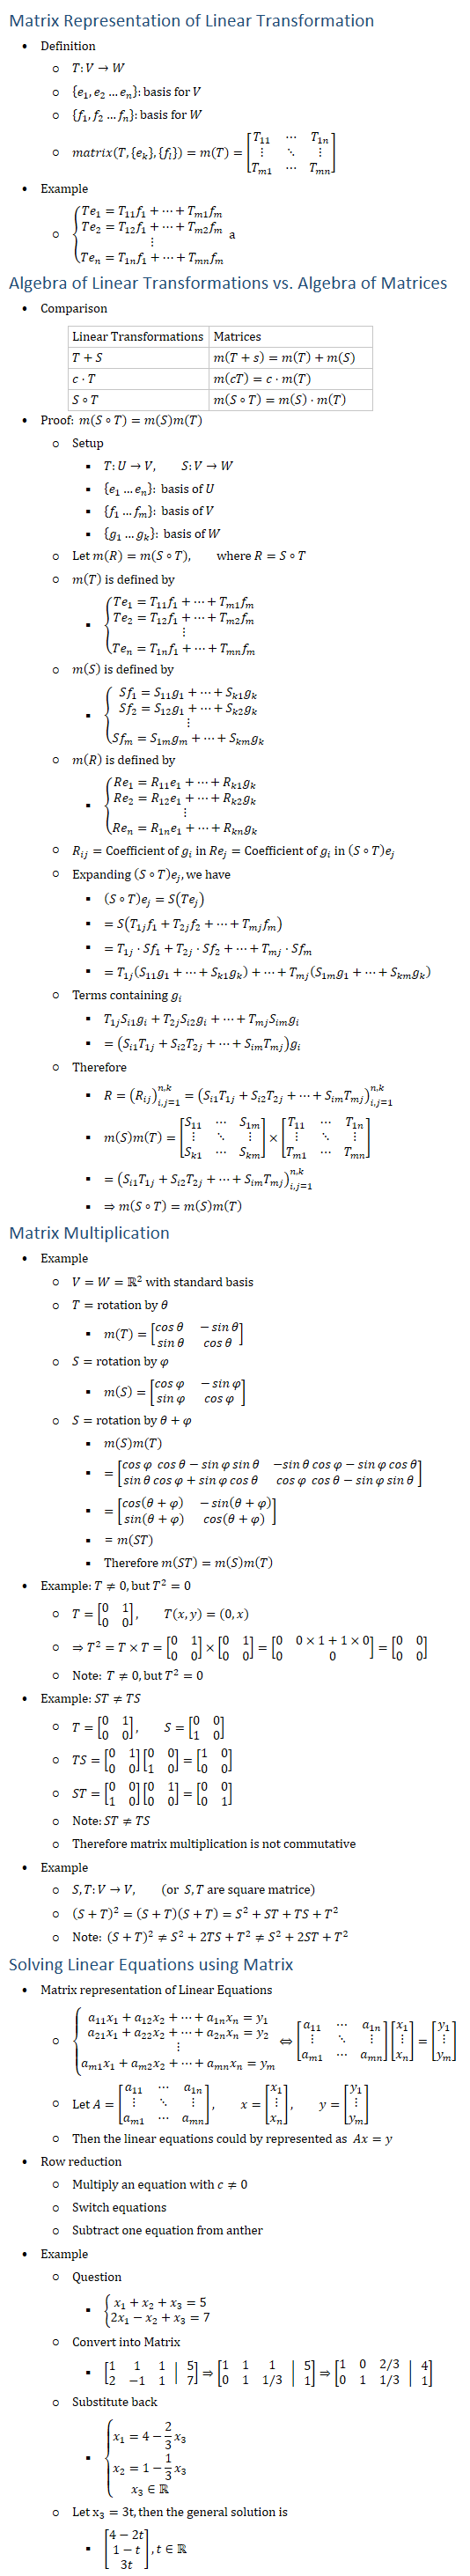 Matrix Representation of Linear Transformation • Definition ○ T:V→W ○ {e_1,e_2…e_n }:basis for V ○ {f_1,f_2…f_n }:basis for W ○ matrix(T,{e_k },{f_l })=m(T)=[■8(T_11&⋯&T_1n@⋮&⋱&⋮@T_m1&⋯&T_mn )] • Example ○ {■(Te_1=T_11 f_1+…+T_m1 f_m@Te_2=T_12 f_1+…+T_m2 f_m@⋮@Te_n=T_1n f_1+…+T_mn f_m ) ┤a Algebra of Linear Transformations vs. Algebra of Matrices • Comparison Linear Transformations Matrices T+S m(T+s)=m(T)+m(S) c⋅T m(cT)=c⋅m(T) S∘T m(S∘T)=m(S)⋅m(T) • Proof: m(S∘T)=m(S)m(T) ○ Setup § T:U→V, S:V→W § {e_1…e_n }: basis of U § {f_1…f_m }: basis of V § {g_1…g_k }: basis of W ○ Let m(R)=m(S∘T), where R=S∘T ○ m(T) is defined by § {■(Te_1=T_11 f_1+…+T_m1 f_m@Te_2=T_12 f_1+…+T_m2 f_m@⋮@Te_n=T_1n f_1+…+T_mn f_m ) ┤ ○ m(S) is defined by § {■(Sf_1=S_11 g_1+…+S_k1 g_k@Sf_2=S_12 g_1+…+S_k2 g_k@⋮@Sf_m=S_1m g_m+…+S_km g_k ) ┤ ○ m(R) is defined by § {■(Re_1=R_11 e_1+…+R_k1 g_k@Re_2=R_12 e_1+…+R_k2 g_k@⋮@Re_n=R_1n e_1+…+R_kn g_k ) ┤ ○ R_ij=Coefficient of g_i in 〖Re〗_j=Coefficient of g_i in (S∘T) e_j ○ Expanding (S∘T) e_j, we have § (S∘T) e_j=S(〖Te〗_j ) § =S(T_1j f_1+T_2j f_2+…+T_mj f_m ) § =T_1j⋅〖Sf〗_1+T_2j⋅〖Sf〗_2+…+T_mj⋅〖Sf〗_m § =T_1j (S_11 g_1+…+S_k1 g_k )+…+T_mj (S_1m g_1+…+S_km g_k ) ○ Terms containing g_i § T_1j S_i1 g_i+T_2j S_i2 g_i+…+T_mj S_im g_i § =(S_i1 T_1j+S_i2 T_2j+…+S_im T_mj ) g_i ○ Therefore § R=(R_ij )_(i,j=1)^(n,k)=(S_i1 T_1j+S_i2 T_2j+…+S_im T_mj )_(i,j=1)^(n,k) § m(S)m(T)=[■8(S_11&⋯&S_1m@⋮&⋱&⋮@S_k1&⋯&S_km )]×[■8(T_11&⋯&T_1n@⋮&⋱&⋮@T_m1&⋯&T_mn )] § =(S_i1 T_1j+S_i2 T_2j+…+S_im T_mj )_(i,j=1)^(n,k) § ⇒m(S∘T)=m(S)m(T) Matrix Multiplication • Example ○ V=W=R2 with standard basis ○ T=rotation by θ § m(T)=[■8(cos⁡〖θ 〗&−sin⁡θ@sin⁡θ&cos⁡〖θ 〗 )] ○ S=rotation by φ § m(S)=[■8(cos⁡〖φ 〗&−sin⁡φ@sin⁡φ&cos⁡〖φ 〗 )] ○ S=rotation by θ+φ § m(S)m(T) § =[■8(cos⁡〖φ 〗 cos⁡θ−sin⁡φ sin⁡θ&〖−sin〗⁡θ cos⁡φ−sin⁡φ cos⁡θ@sin⁡θ cos⁡φ+sin⁡φ cos⁡θ&cos⁡〖φ 〗 cos⁡θ−sin⁡φ sin⁡θ )] § =[■8(cos⁡〖(θ+φ) 〗&−sin⁡(θ+φ)@sin⁡(θ+φ)&cos⁡〖(θ+φ) 〗 )] § =m(ST) § Therefore m(ST)=m(S)m(T) • Example: T≠0, but T^2=0 ○ T=[■8(0&1@0&0)], T(x,y)=(0,x) ○ ⇒T^2=T×T=[■8(0&1@0&0)]×[■8(0&1@0&0)]=[■8(0&0×1+1×0@0&0)]=[■8(0&0@0&0)] ○ Note: T≠0, but T^2=0 • Example: ST≠TS ○ T=[■8(0&1@0&0)], S=[■8(0&0@1&0)] ○ TS=[■8(0&1@0&0)][■8(0&0@1&0)]=[■8(1&0@0&0)] ○ ST=[■8(0&0@1&0)][■8(0&1@0&0)]=[■8(0&0@0&1)] ○ Note:ST≠TS ○ Therefore matrix multiplication is not commutative • Example ○ S,T:V→V, (or S,T are square matrice) ○ (S+T)^2=(S+T)(S+T)=S^2+ST+TS+T^2 ○ Note: (S+T)^2≠S^2+2TS+T^2≠S^2+2ST+T^2 Solving Linear Equations using Matrix • Matrix representation of Linear Equations ○ {█(a_11 x_1+a_12 x_2+…+a_1n x_n=y_1@a_21 x_1+a_22 x_2+…+a_2n x_n=y_2@⋮@a_m1 x_1+a_m2 x_2+…+a_mn x_n=y_m )┤⇔[■8(a_11&⋯&a_1n@⋮&⋱&⋮@a_m1&⋯&a_mn )][■8(x_1@⋮@x_n )]=[■8(y_1@⋮@y_m )] ○ Let A=[■8(a_11&⋯&a_1n@⋮&⋱&⋮@a_m1&⋯&a_mn )], x=[■8(x_1@⋮@x_n )], y=[■8(y_1@⋮@y_m )] ○ Then the linear equations could by represented as Ax=y • Row reduction ○ Multiply an equation with c≠0 ○ Switch equations ○ Subtract one equation from anther • Example ○ Question § {█(x_1+x_2+x_3=5@2x_1−x_2+x_3=7)┤ ○ Convert into Matrix § [■8(1&1&1@2&−1&1) │ ■8(5@7)]⇒[■8(1&1&1@0&1&1/3) │ ■8(5@1)]⇒[■8(1&0&2/3@0&1&1/3) │ ■8(4@1)] ○ Substitute back § {█(x_1=4−2/3 x_3@x_2=1−1/3 x_3@x_3∈R┤ ○ Let x_3=3t, then the general solution is § [■8(4−2t@1−t@3t)], t∈R